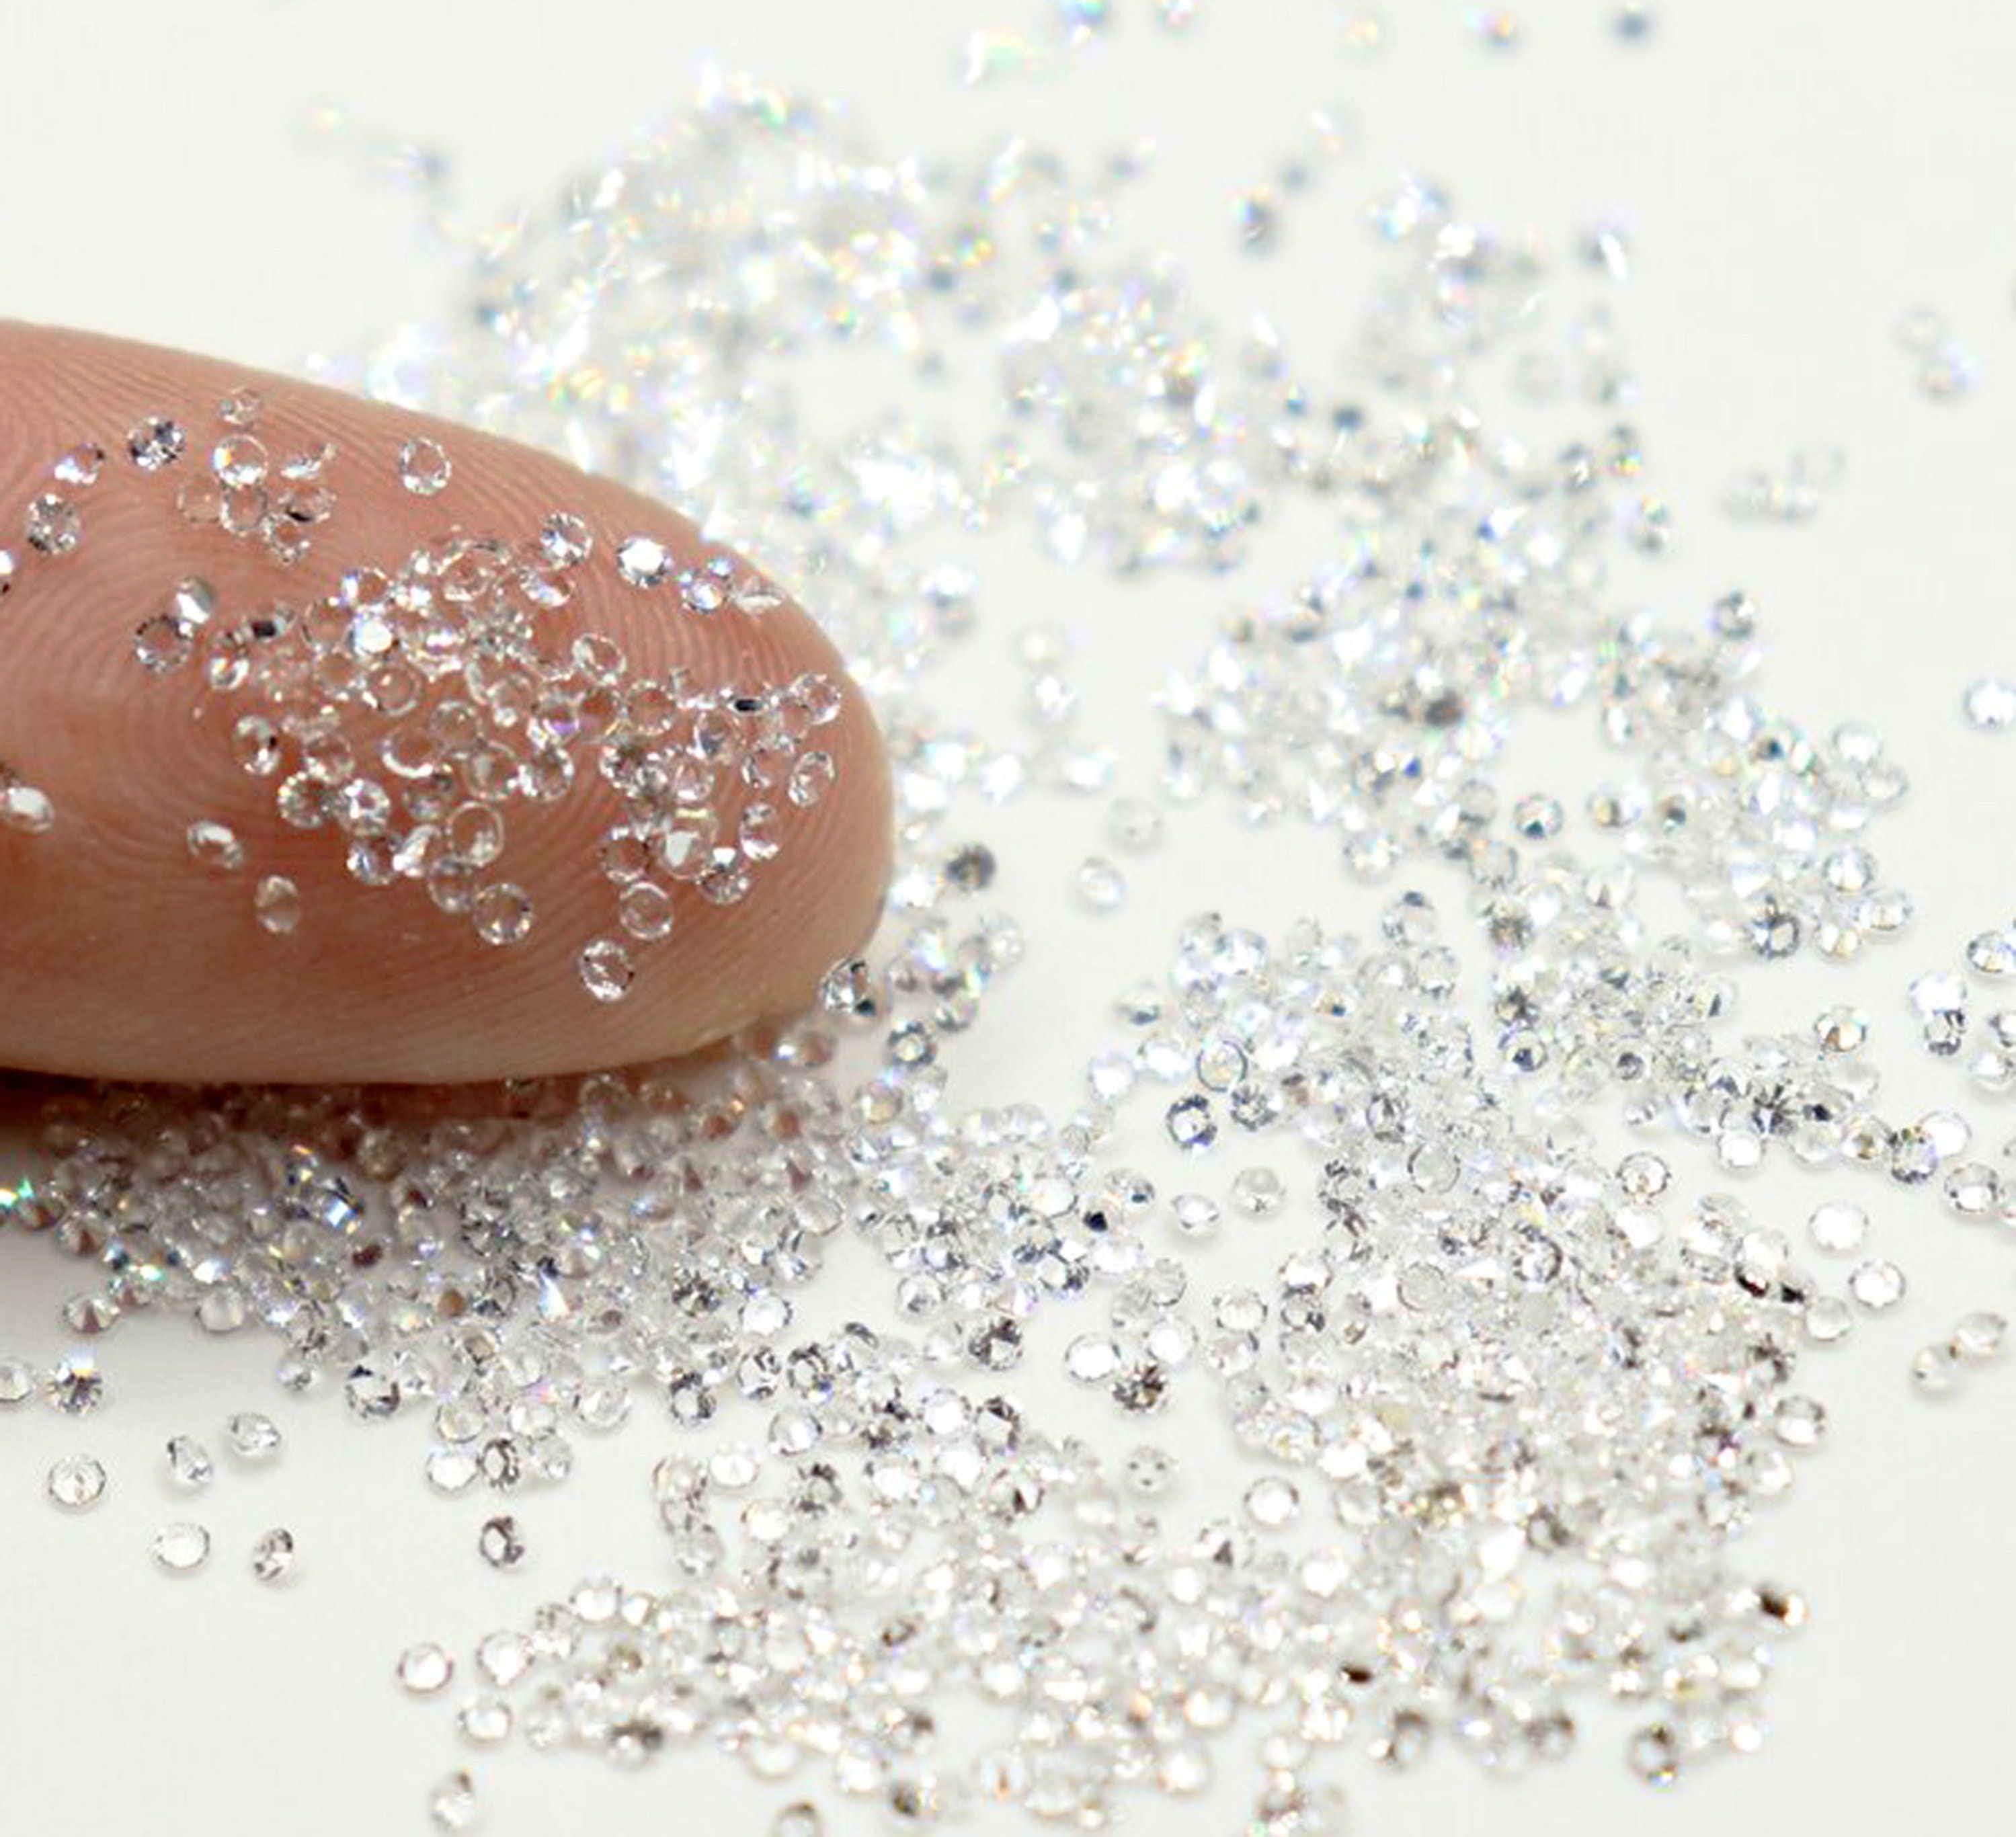 PREMIUM AB CRYSTALS Dust for Nails Crystal Pixie Dust Micro Zircon